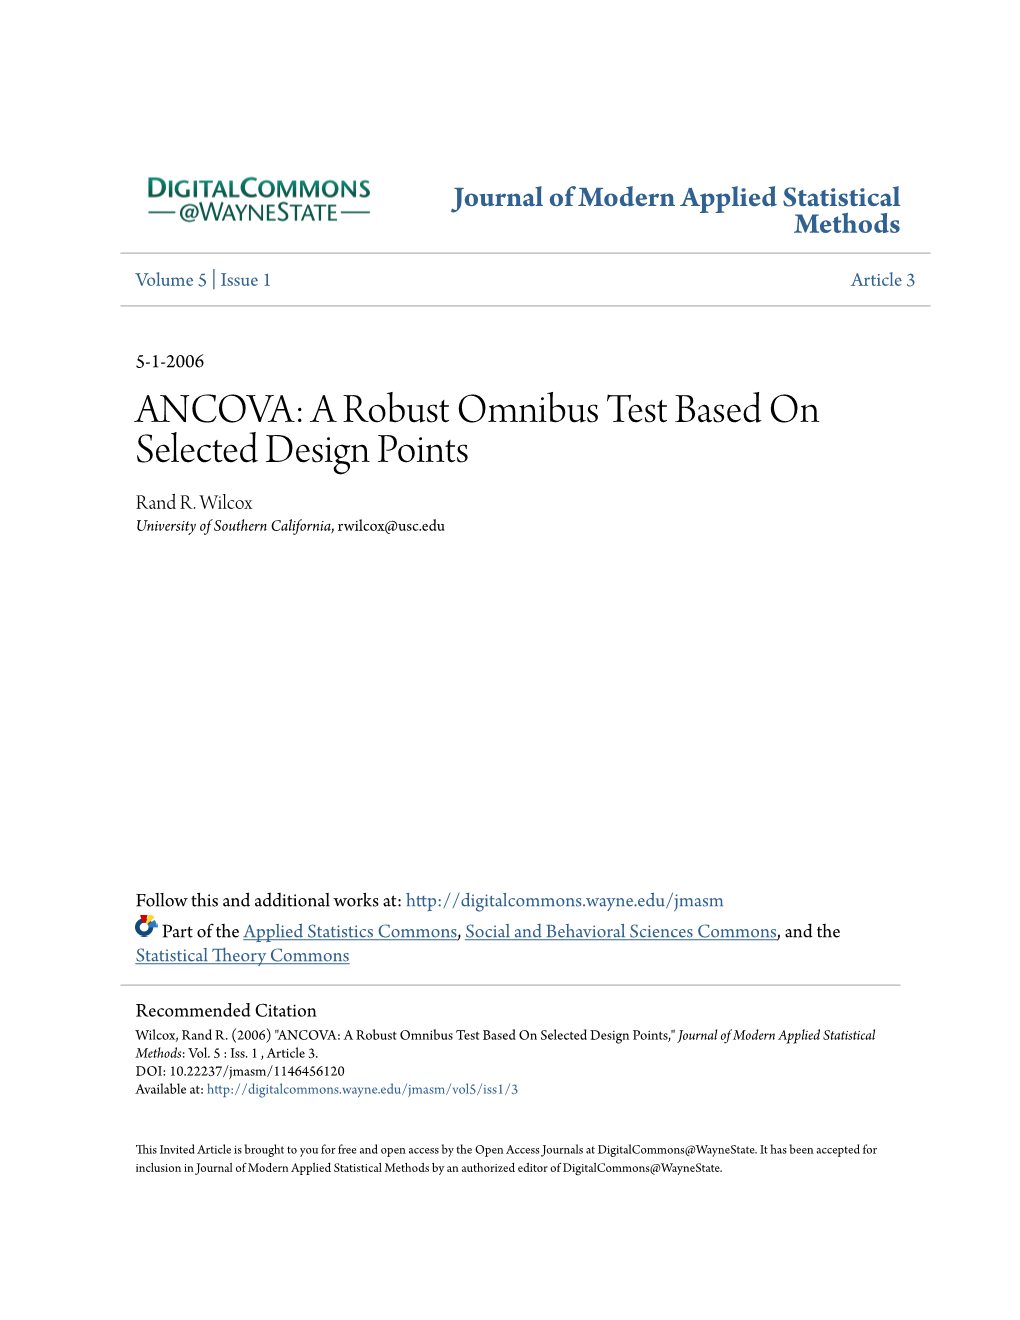 ANCOVA: a Robust Omnibus Test Based on Selected Design Points Rand R